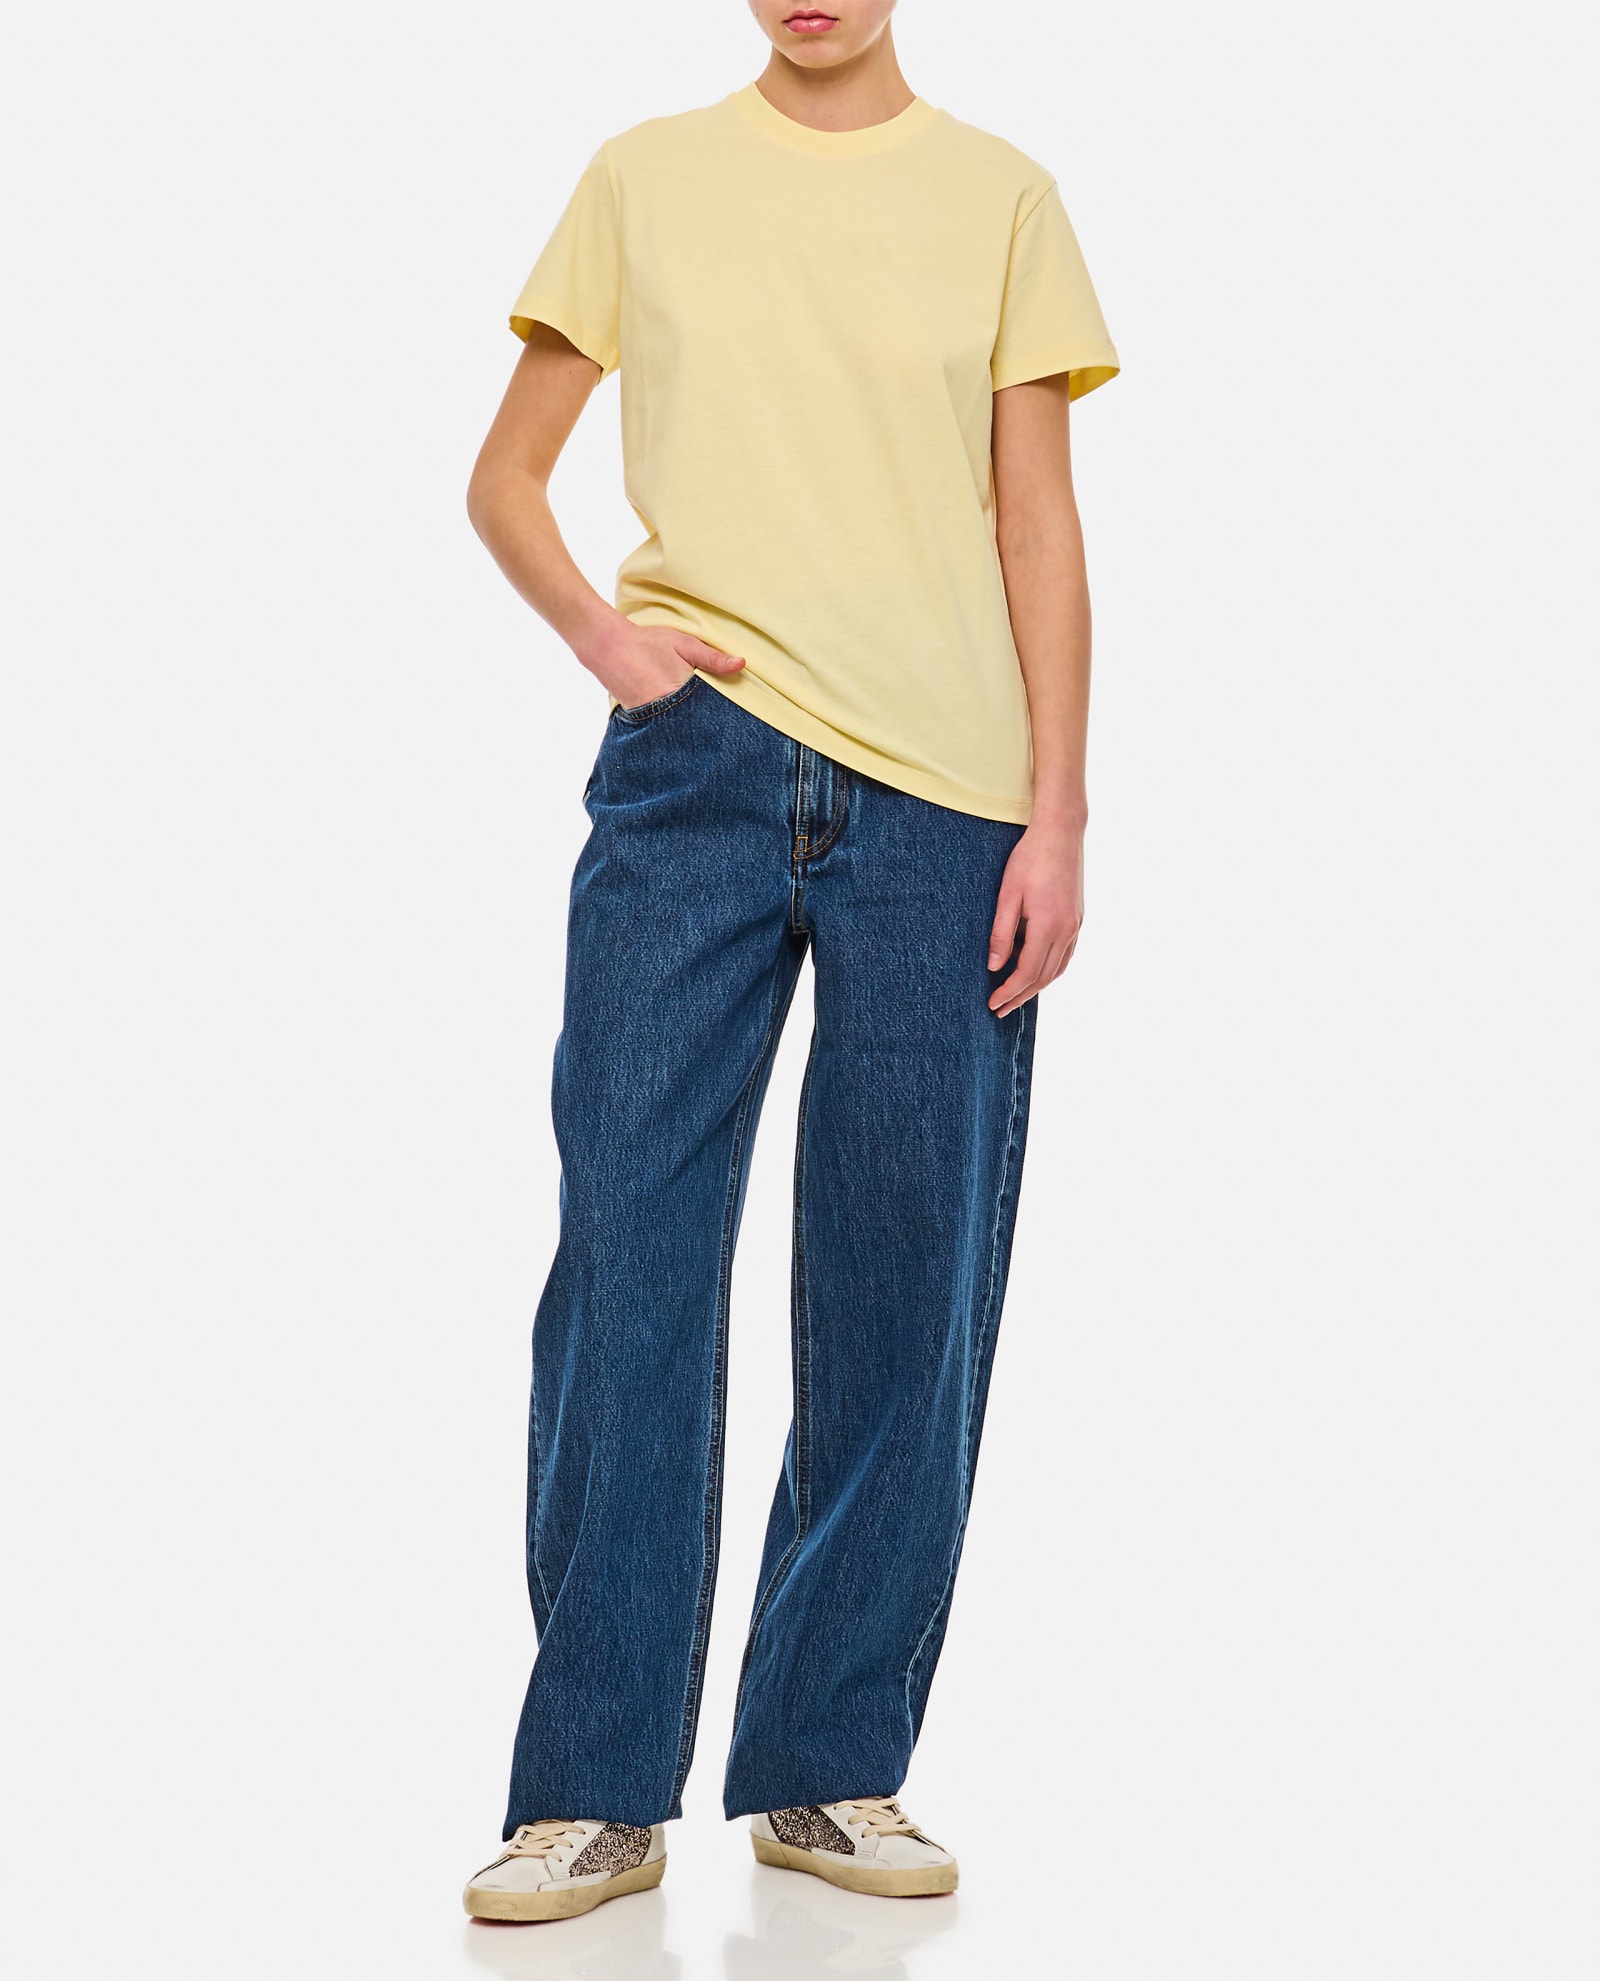 Loulou Studio Denim Pants In Washed Blue